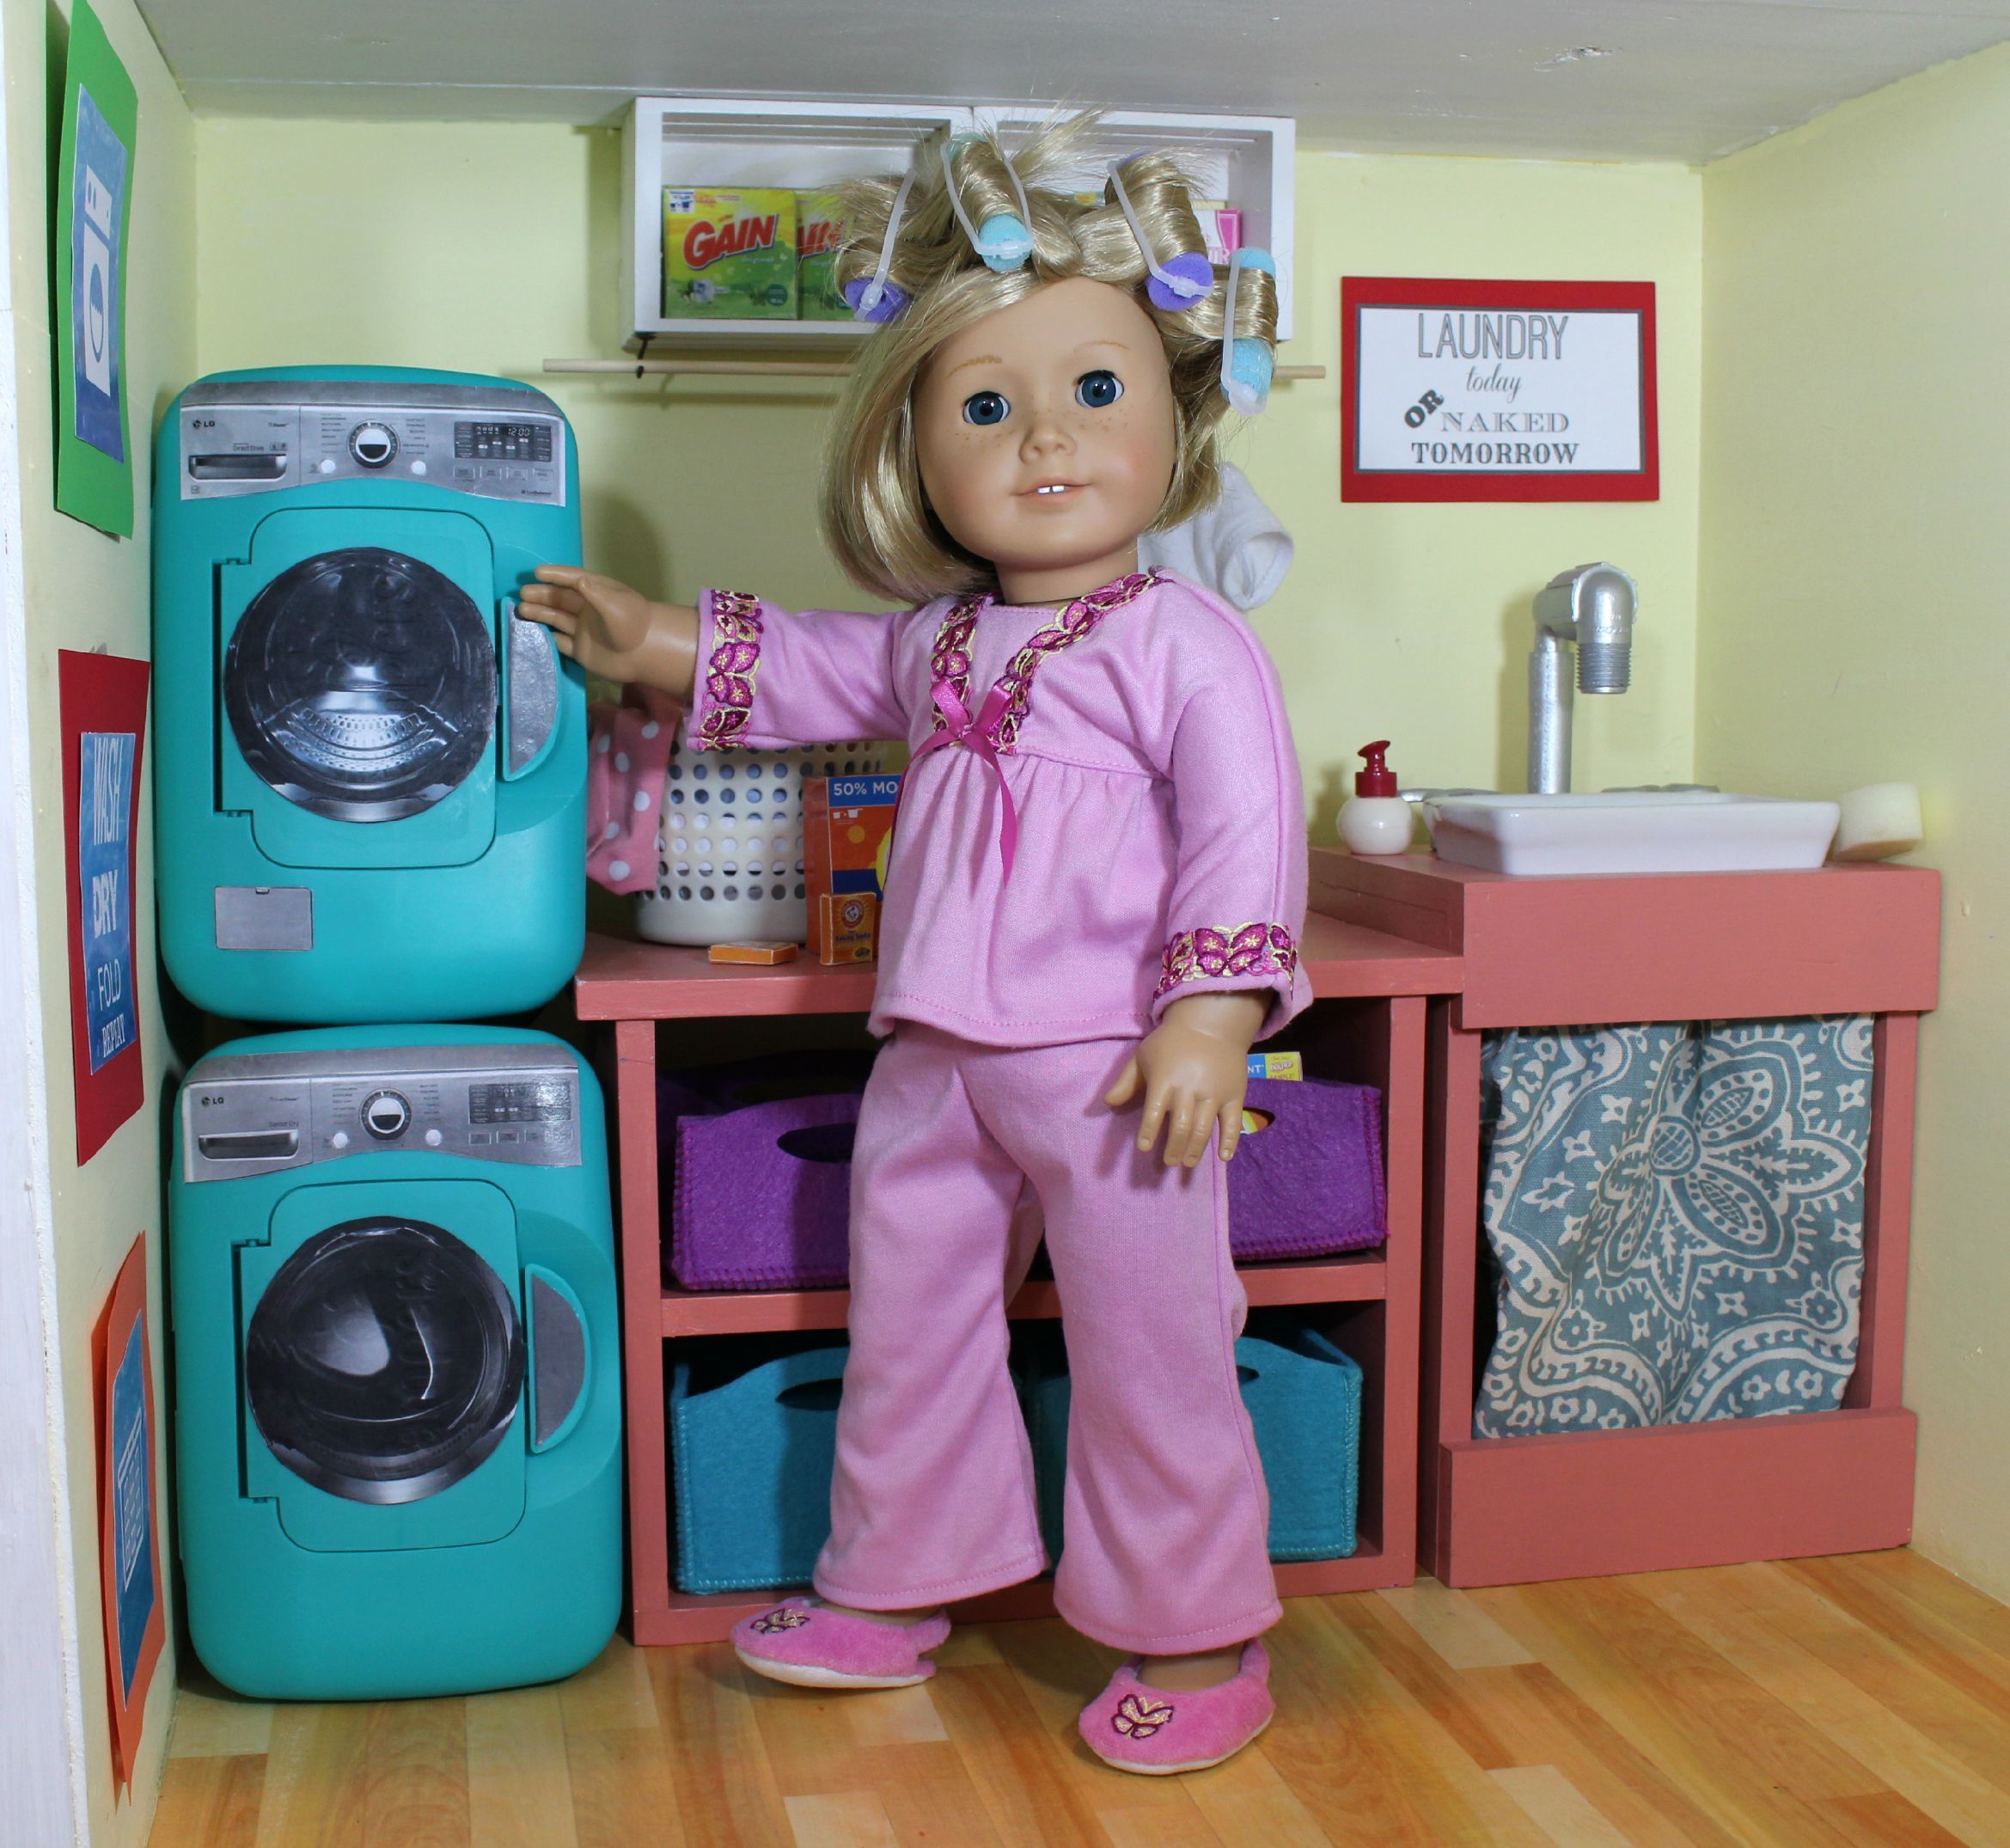 American Girl Laundry Room . diy washer dryer from pampers wipes containers